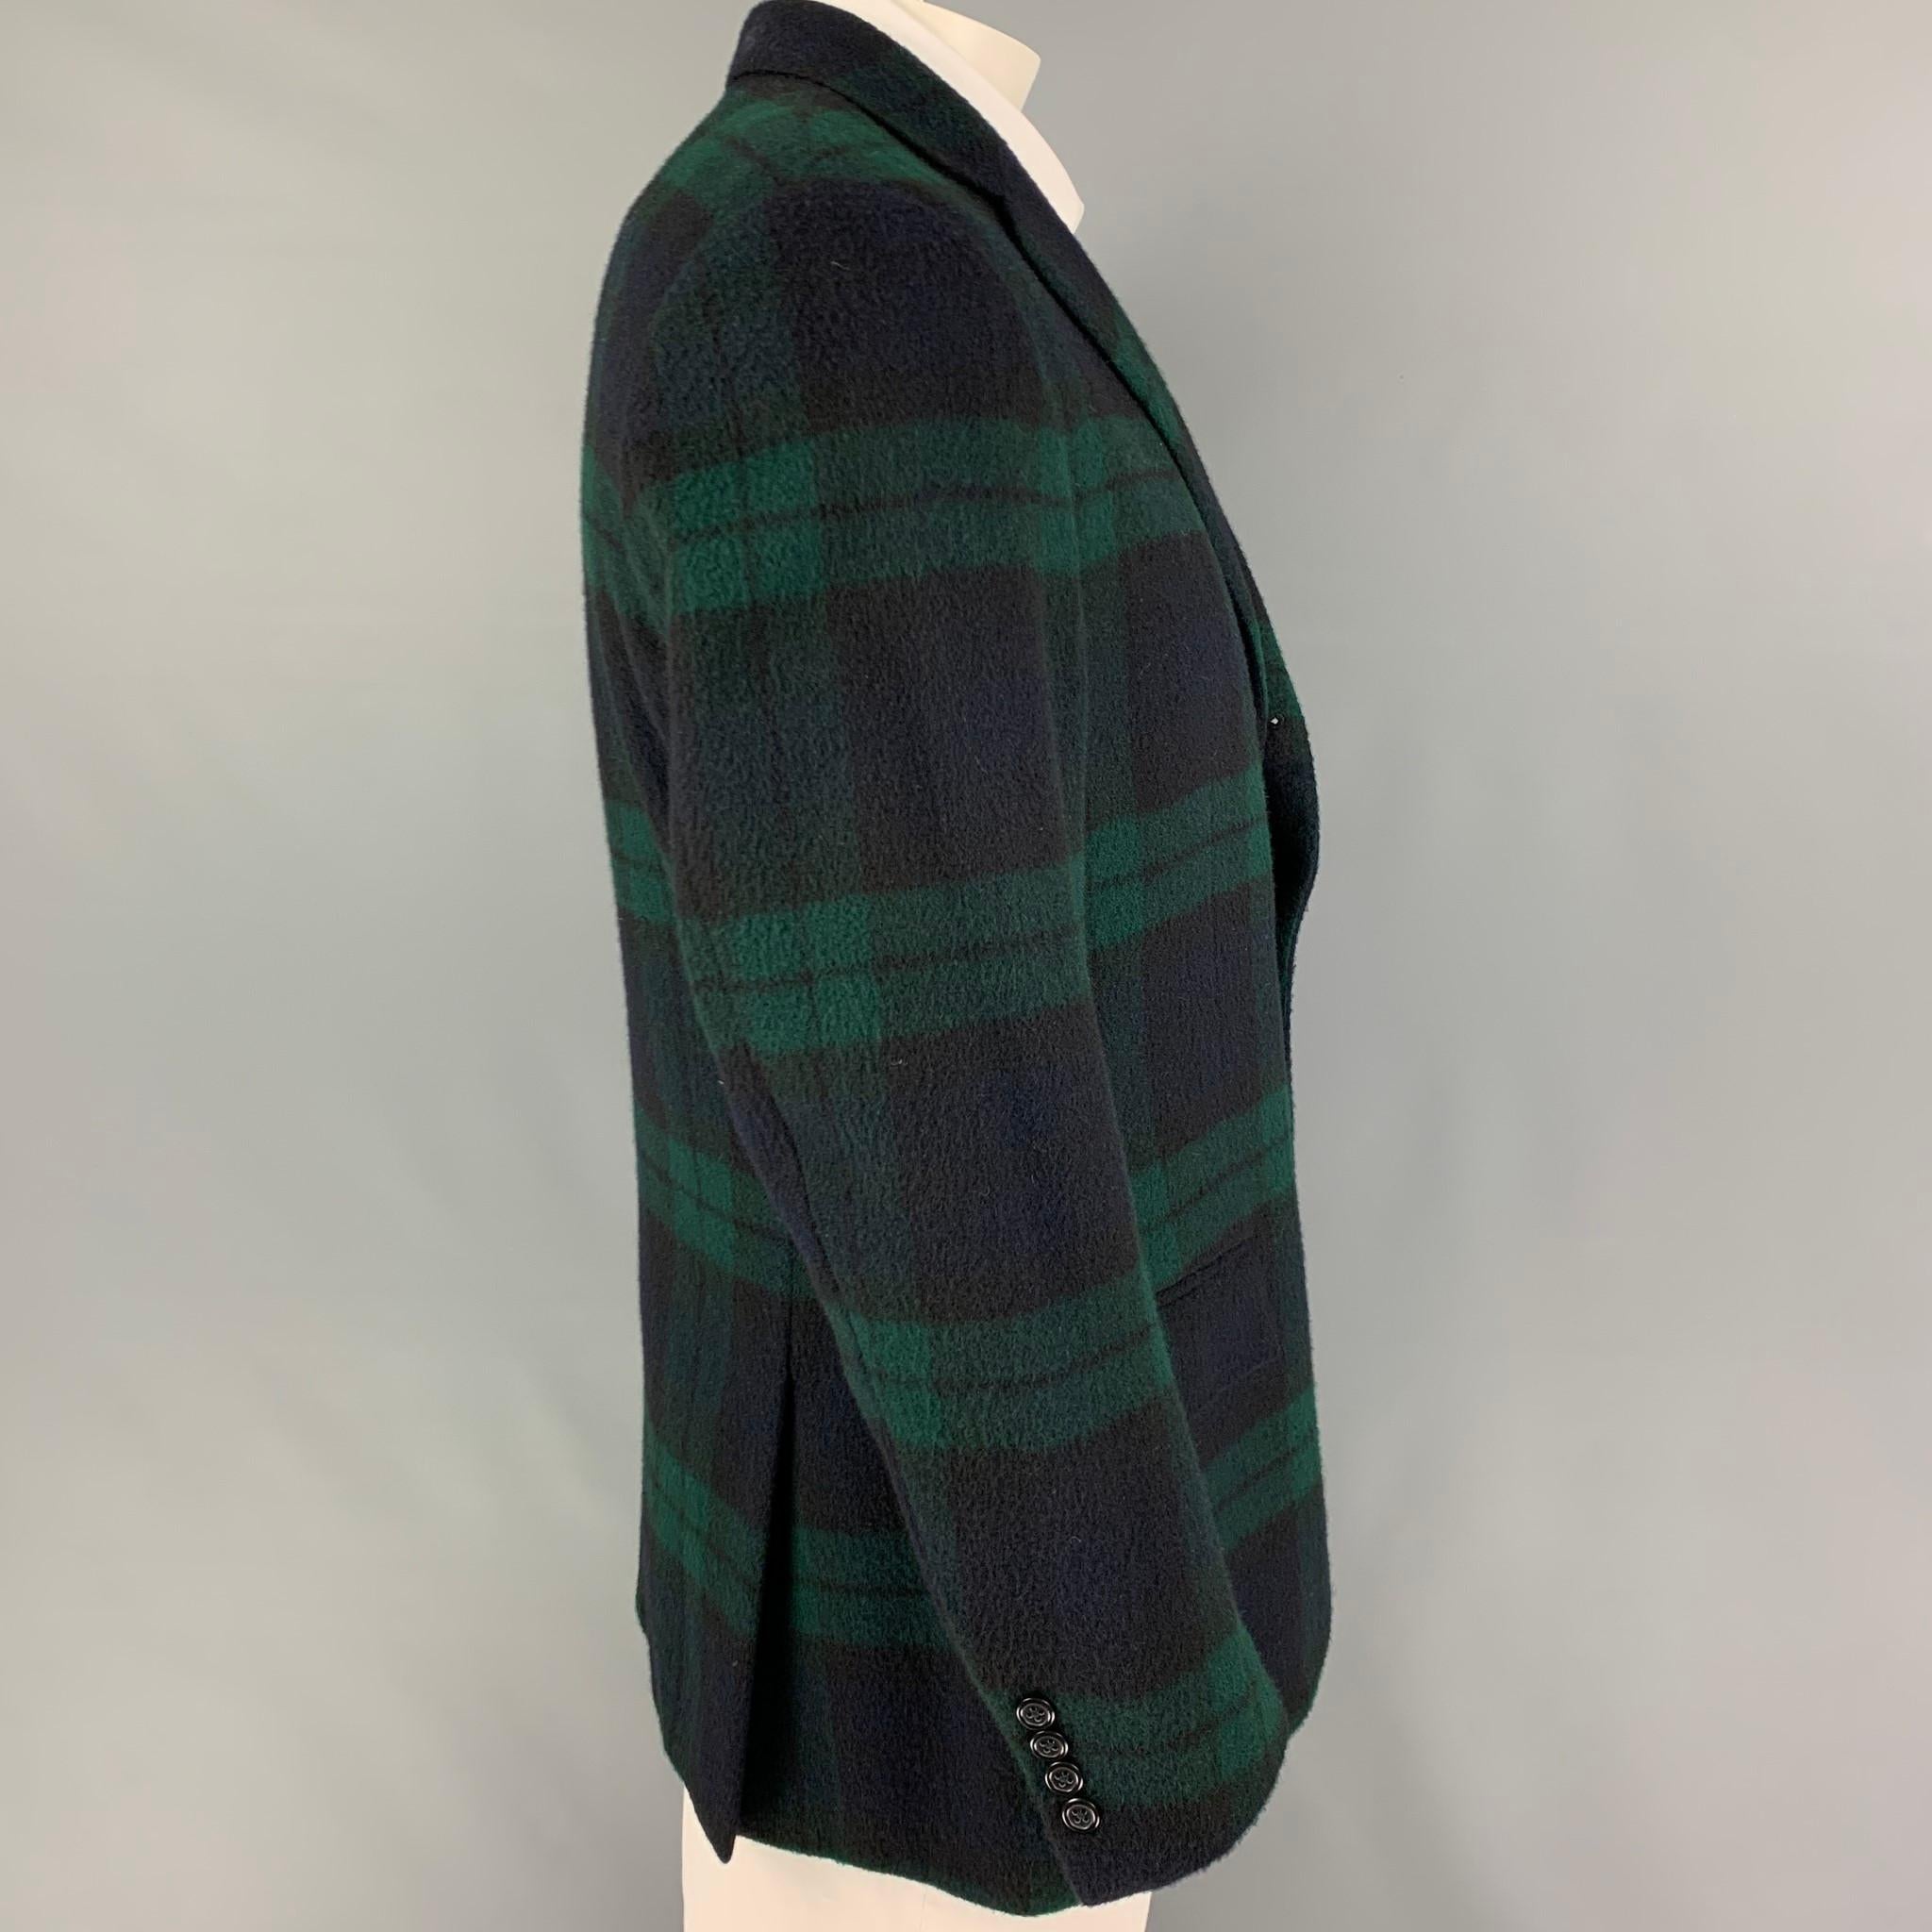 POLO by RALPH LAUREN sport coat comes in a blackwatch plaid cashmere with a full liner featuring a notch lapel, flap pockets, double back vent, and a three button closure.

Very Good Pre-Owned Condition.
Marked: 42

Measurements:

Shoulder: 19